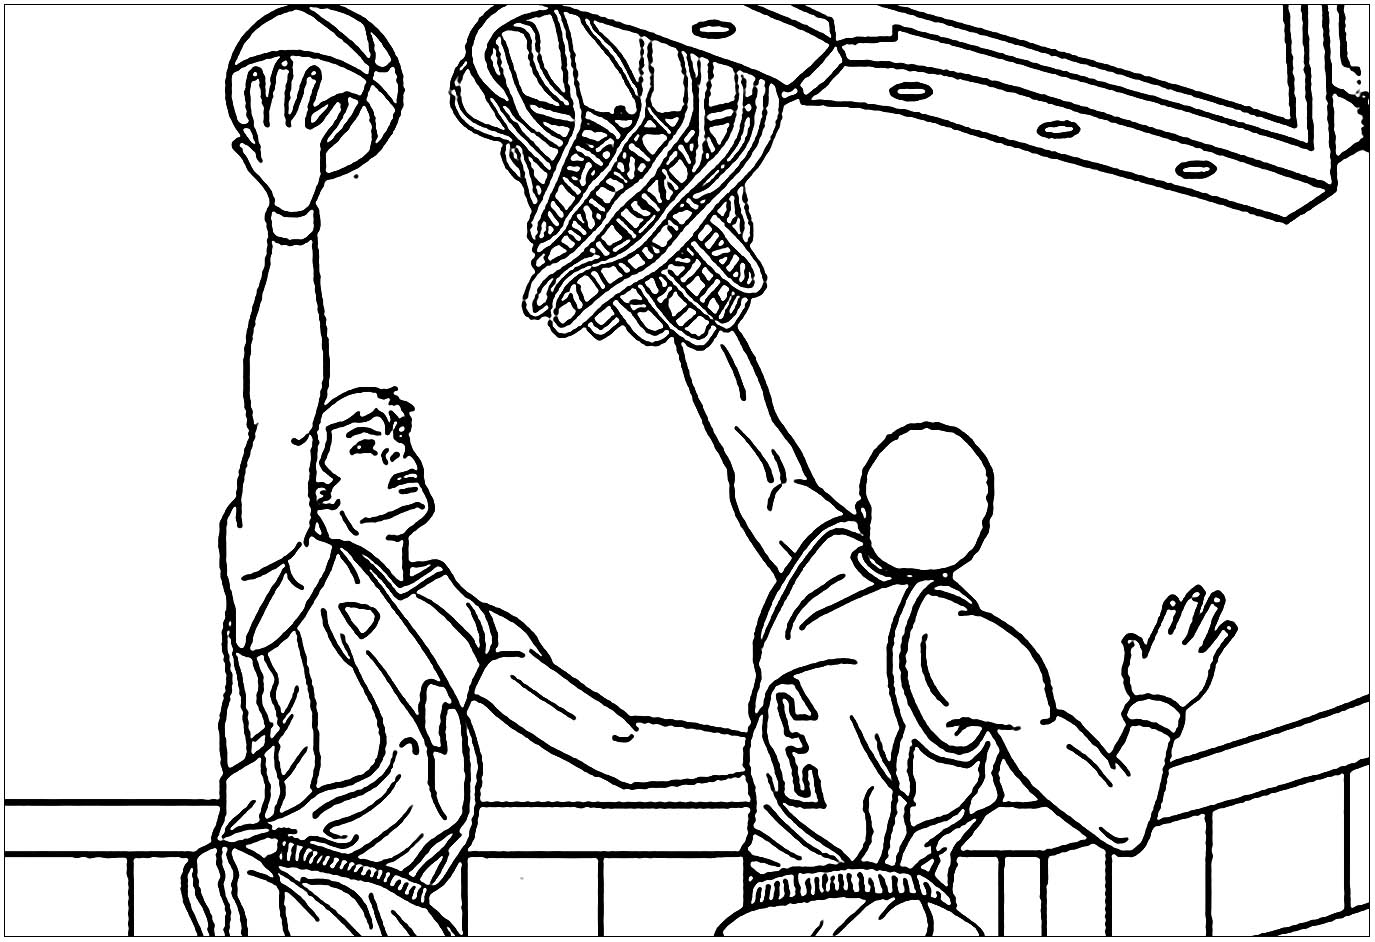 Free basketball coloring pages to color - Basketball Kids Coloring Pages